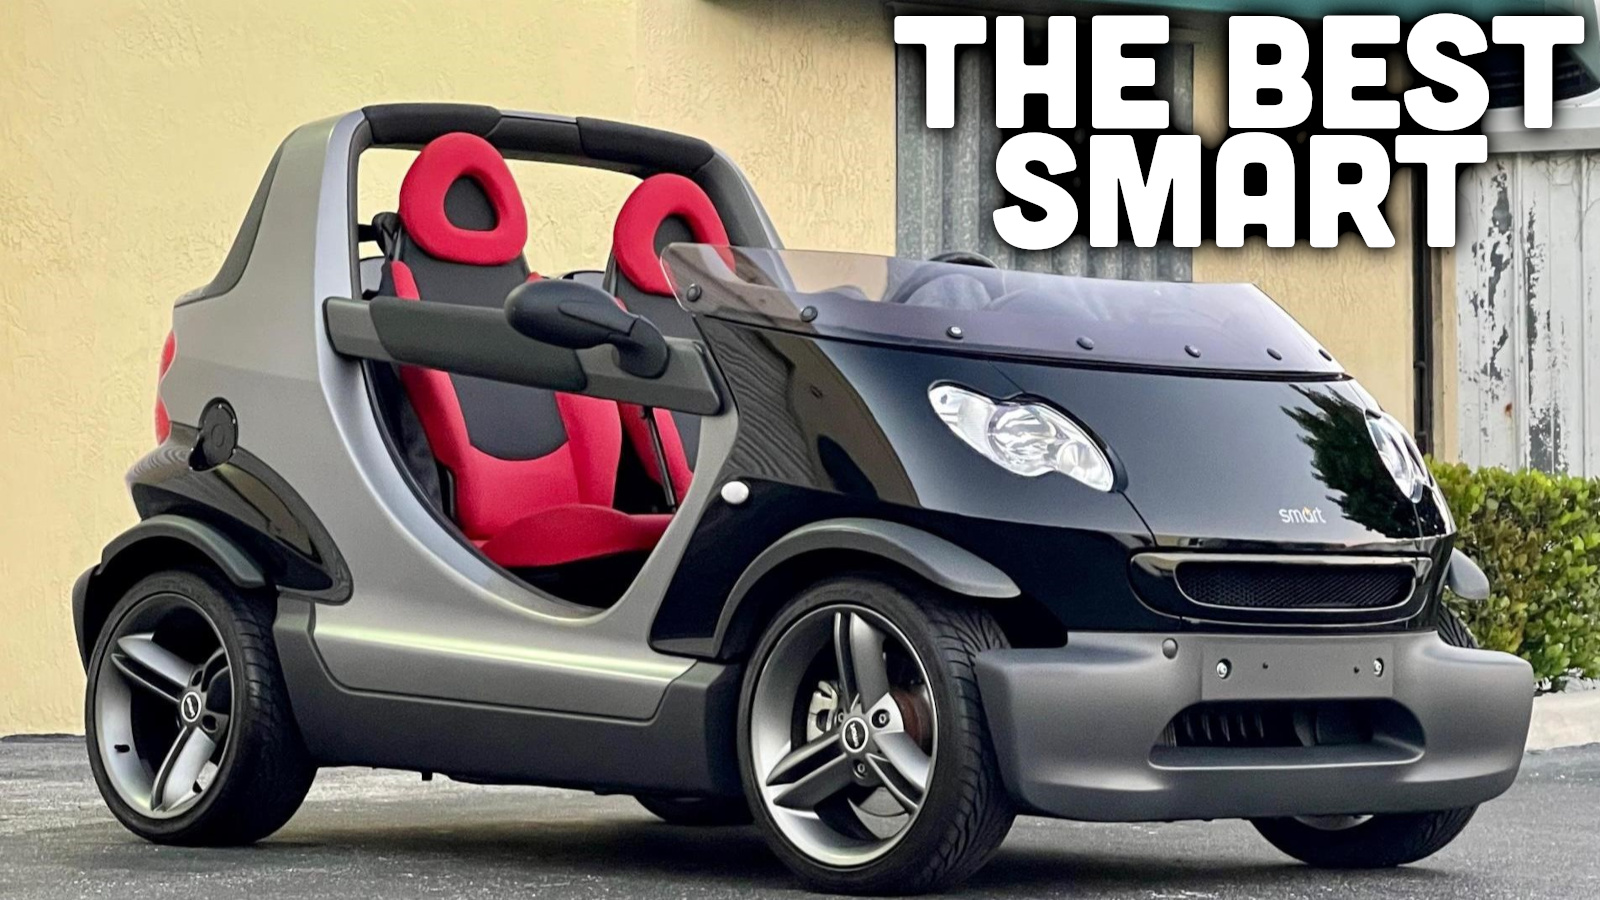 The Holy Grail Of Smart Cars Is This Street-Legal Concept Car And It's For  Sale Right Now - The Autopian